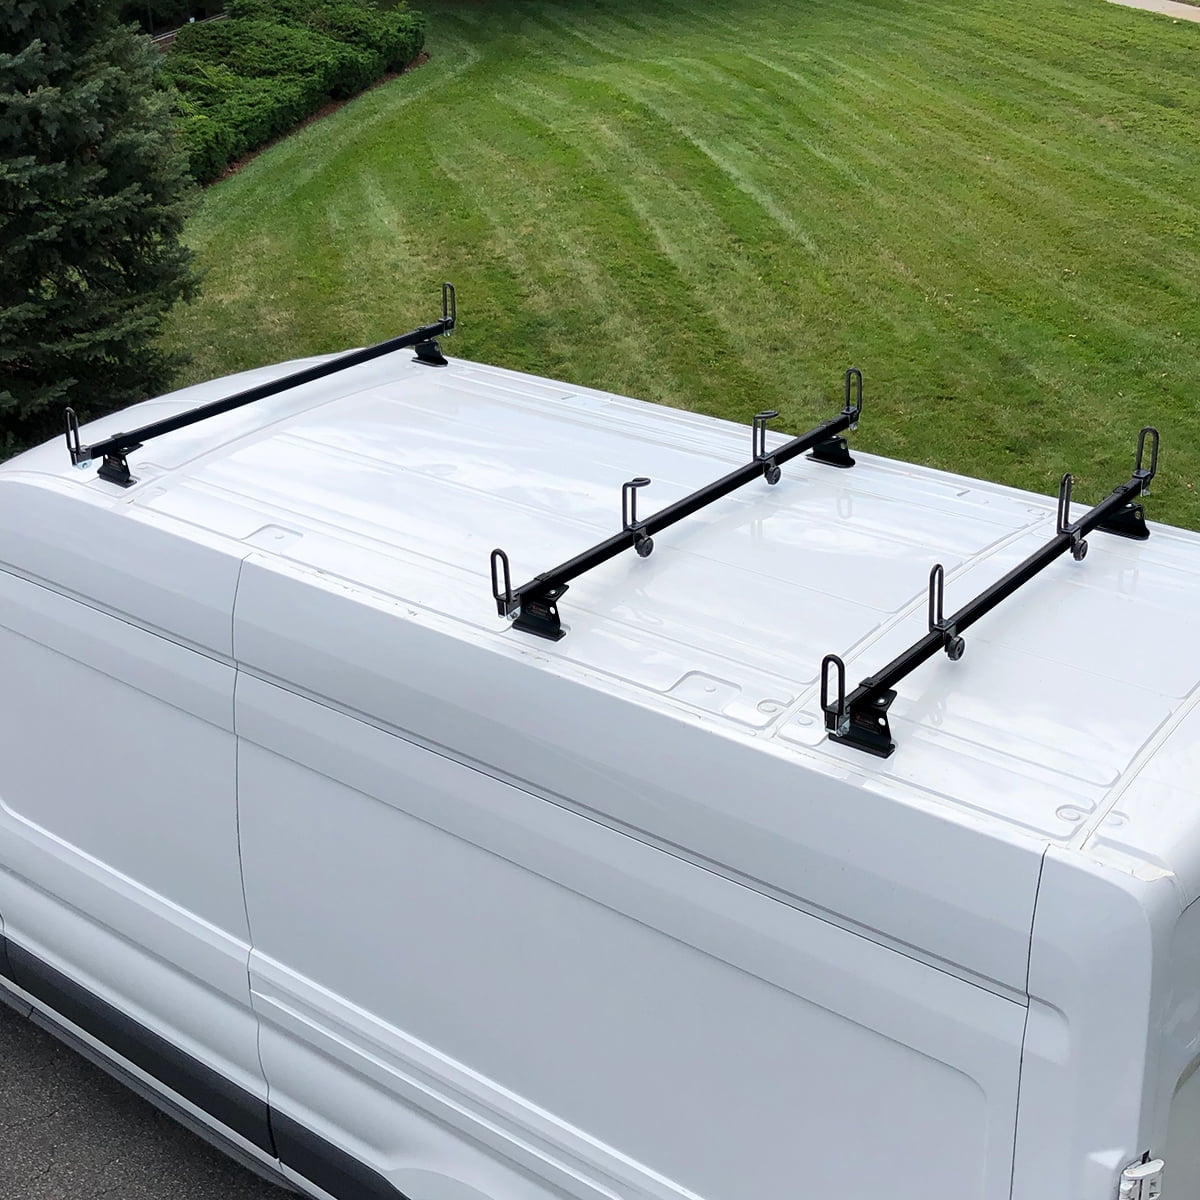 Ford Transit Cargo Van High Roof, Ford Transit Connect Interior Shelving And Roof Racks